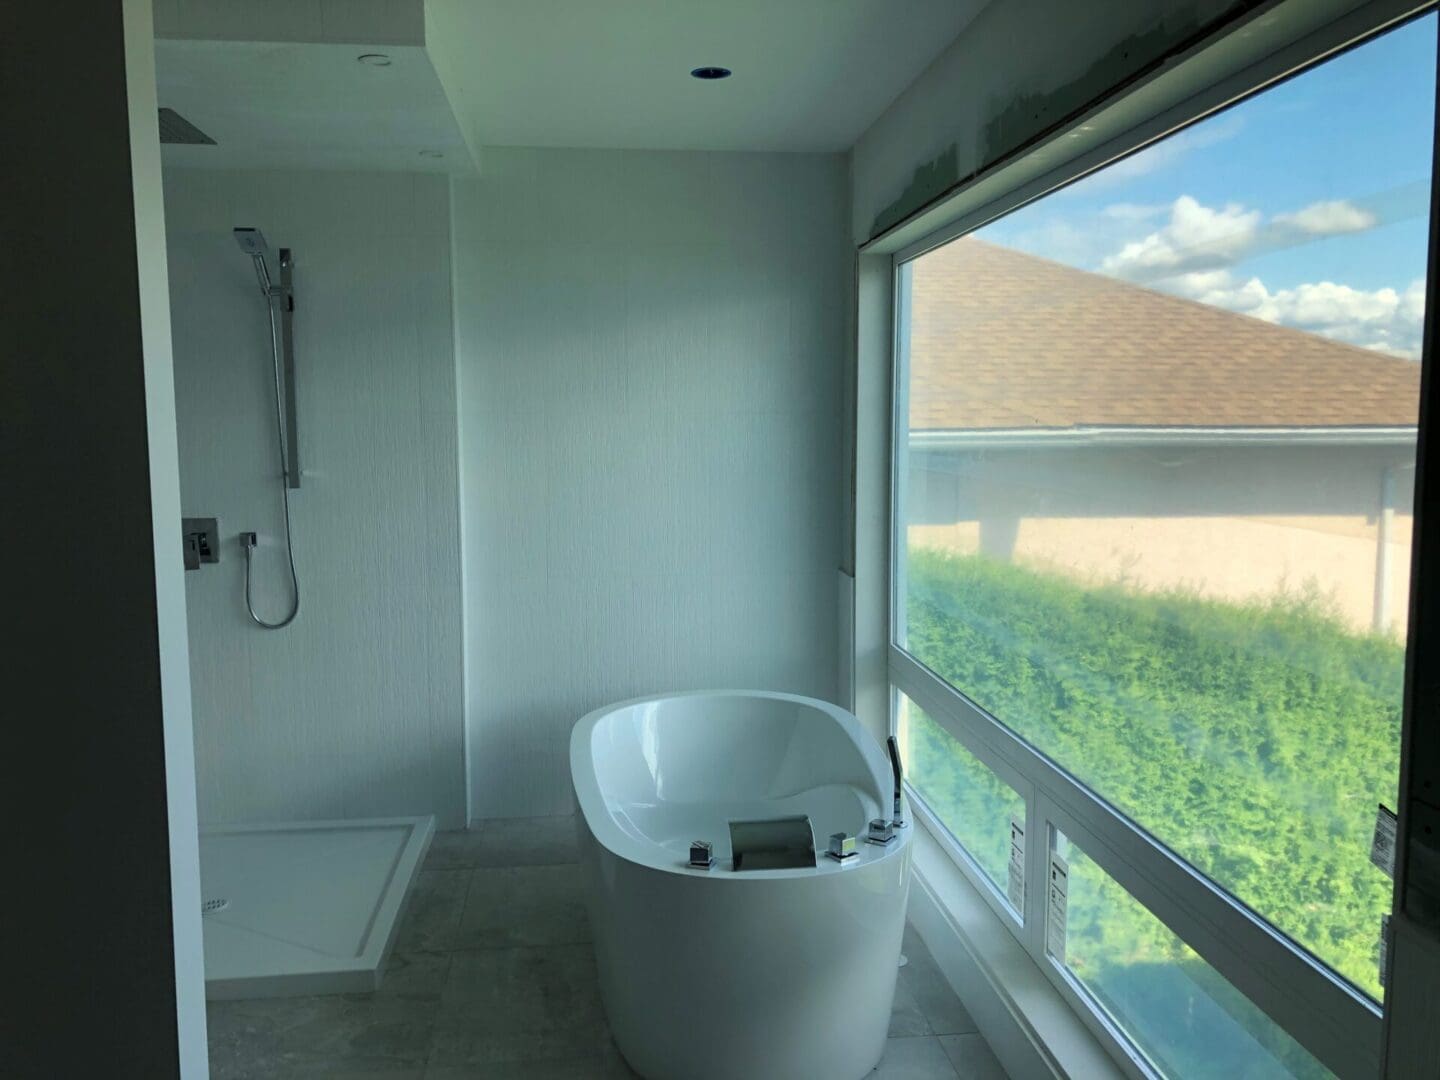 A bathroom with a large window and a tub